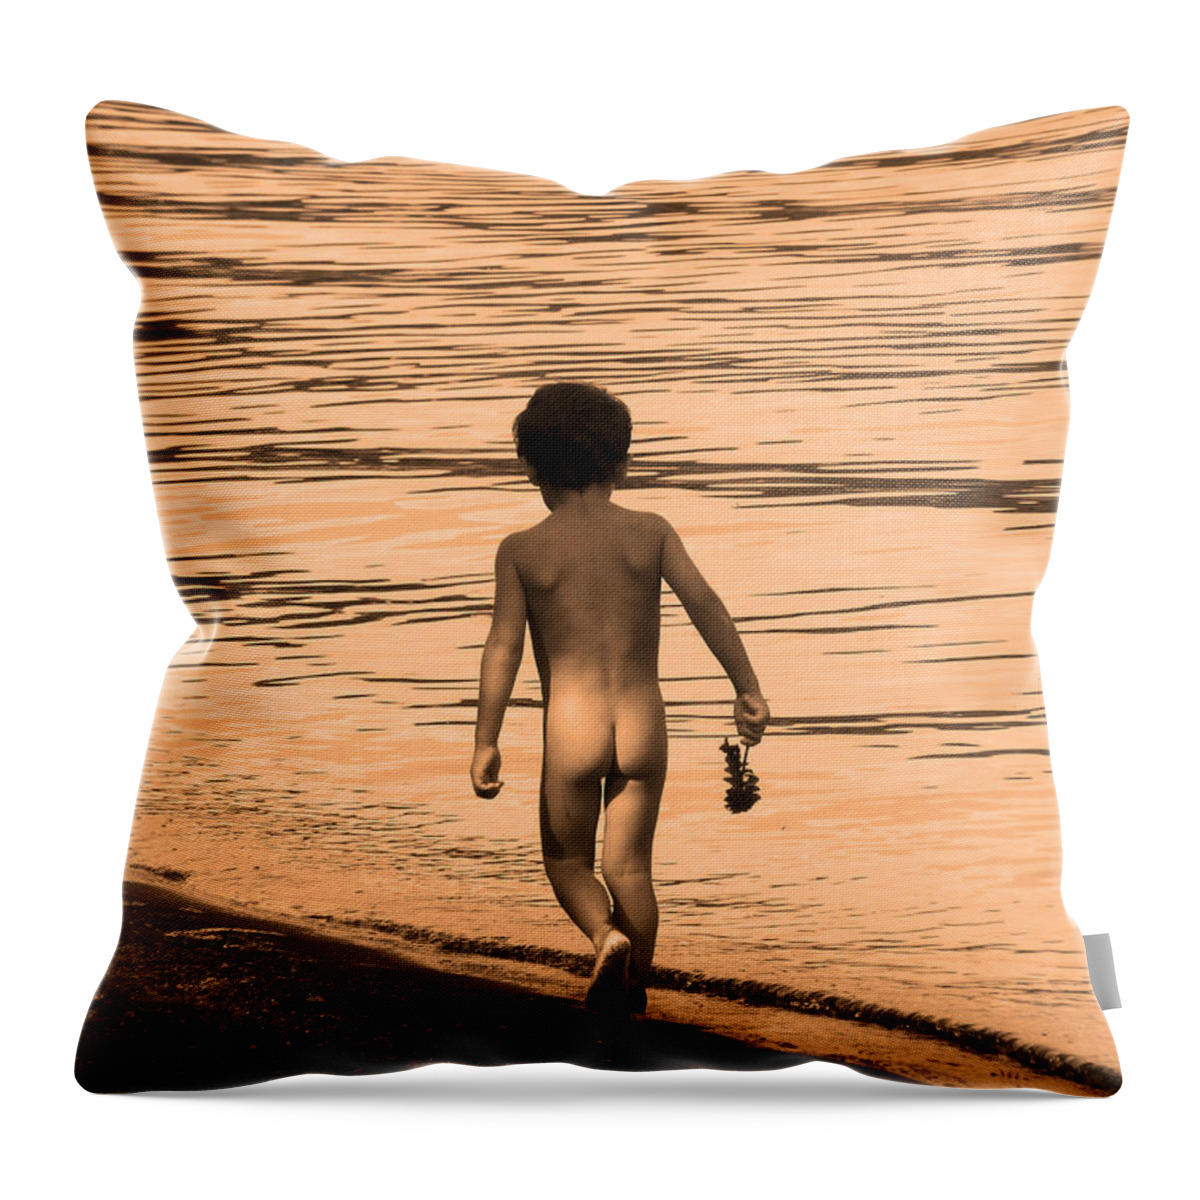 Photography Throw Pillow featuring the photograph Innocence by Marcia Socolik